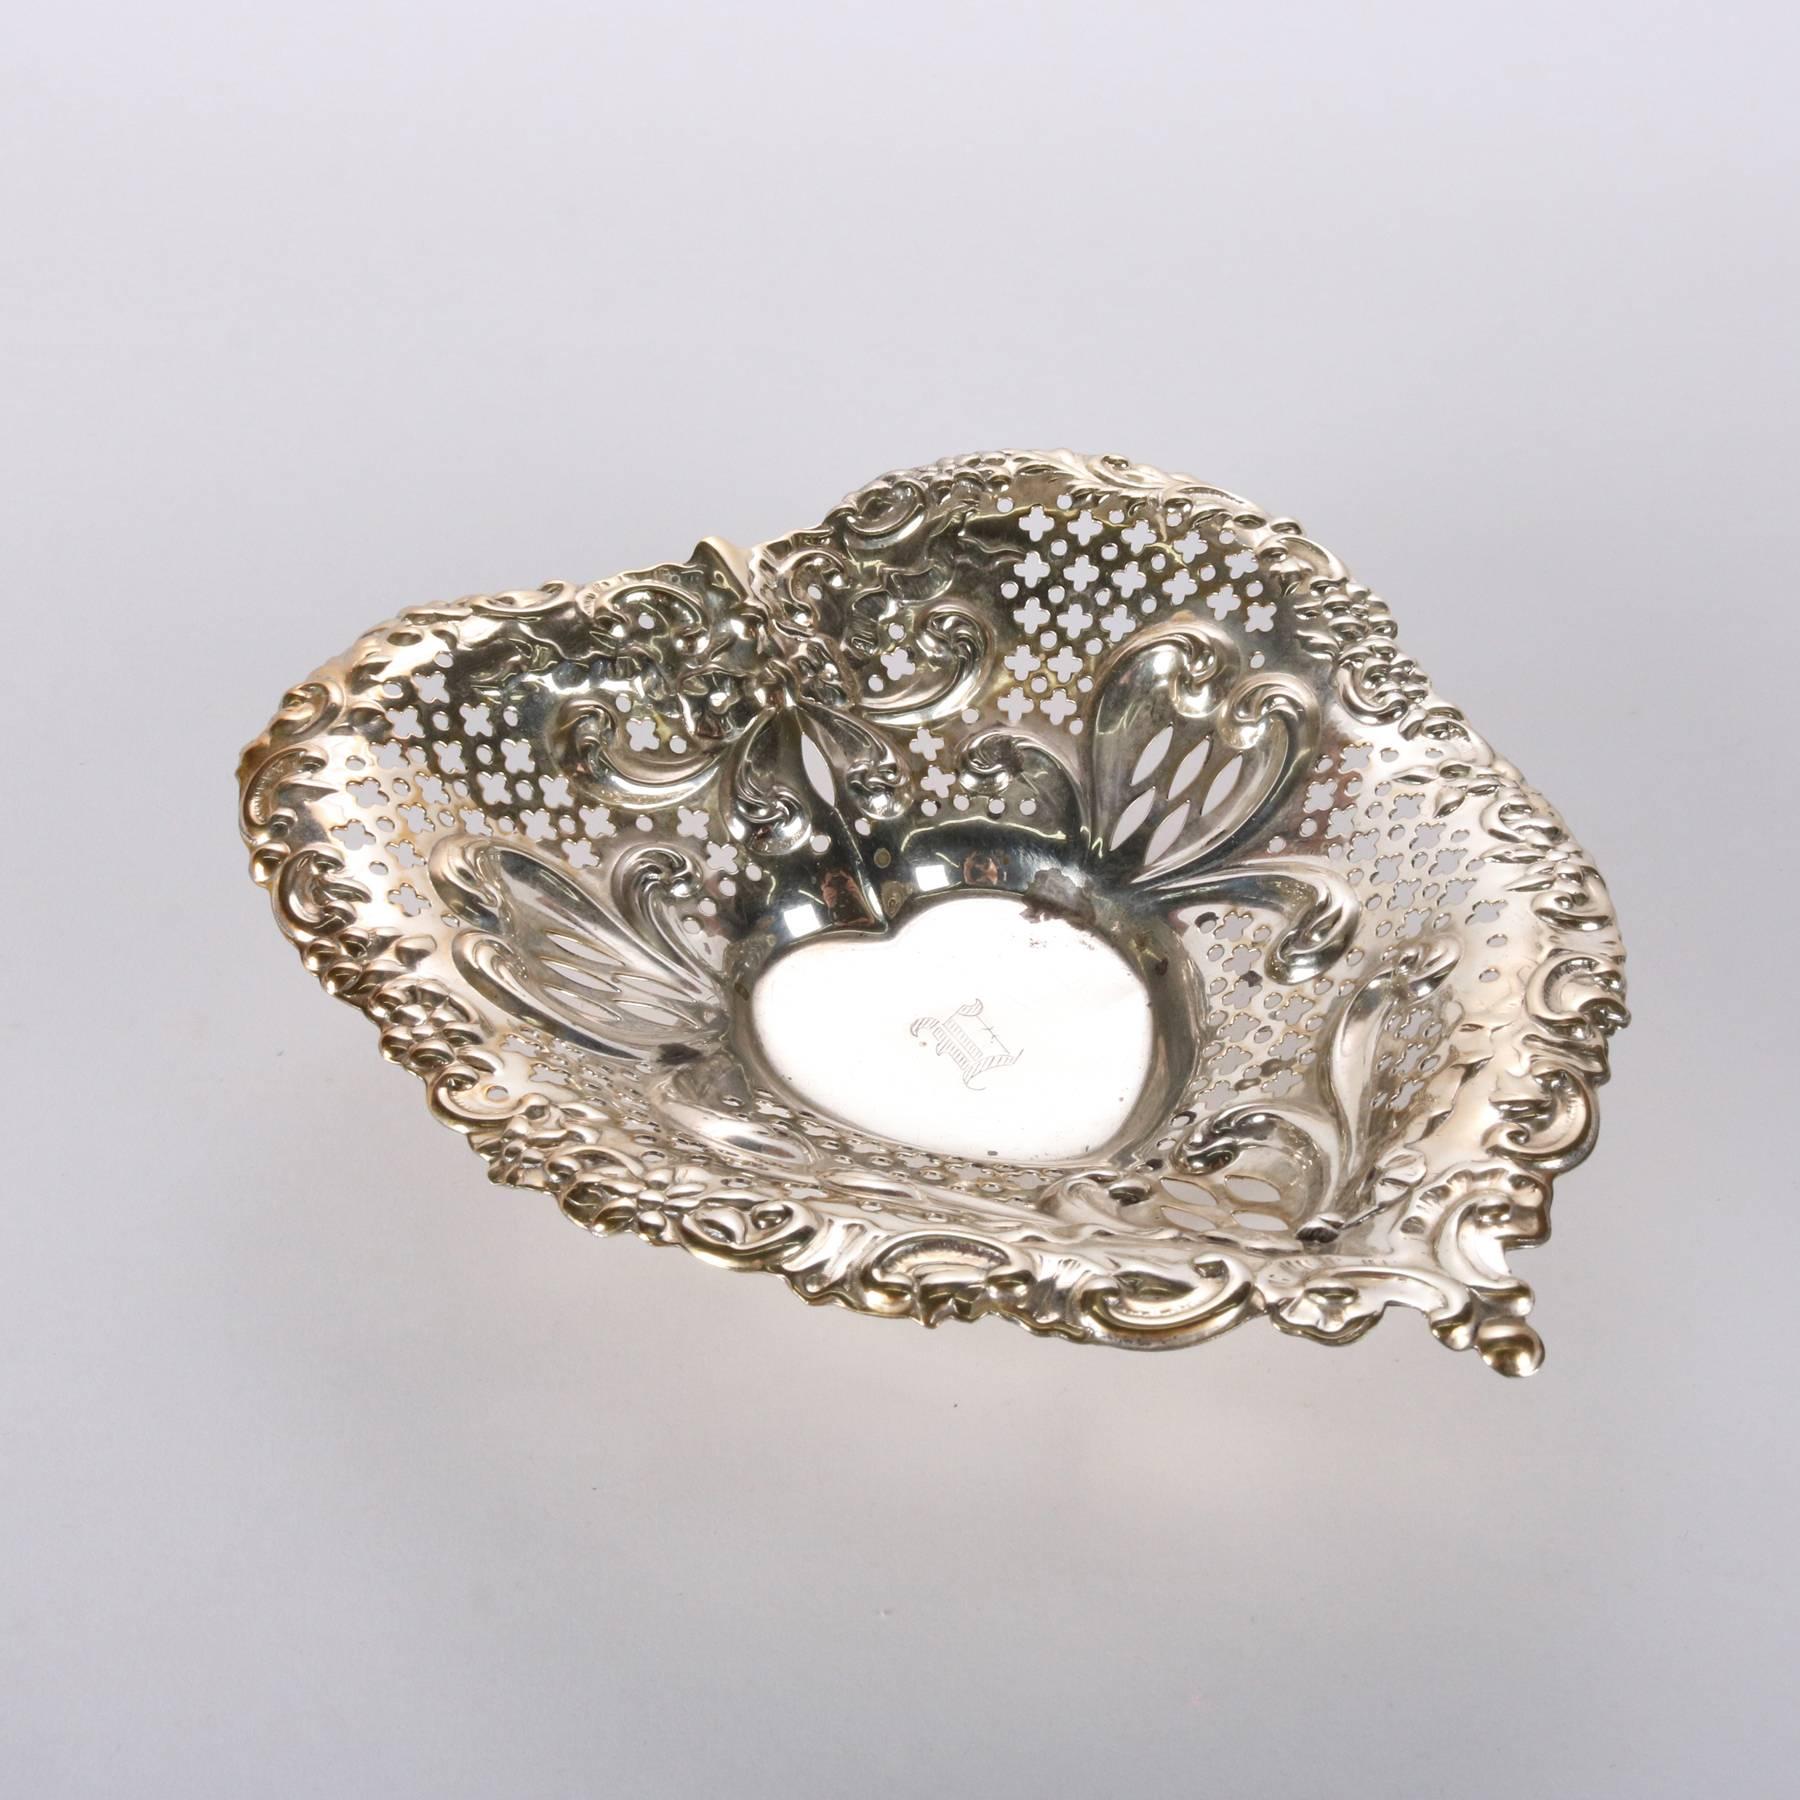 Antique Sterling Silver Gorham Heart Shaped Reticulated and Footed Dish 4